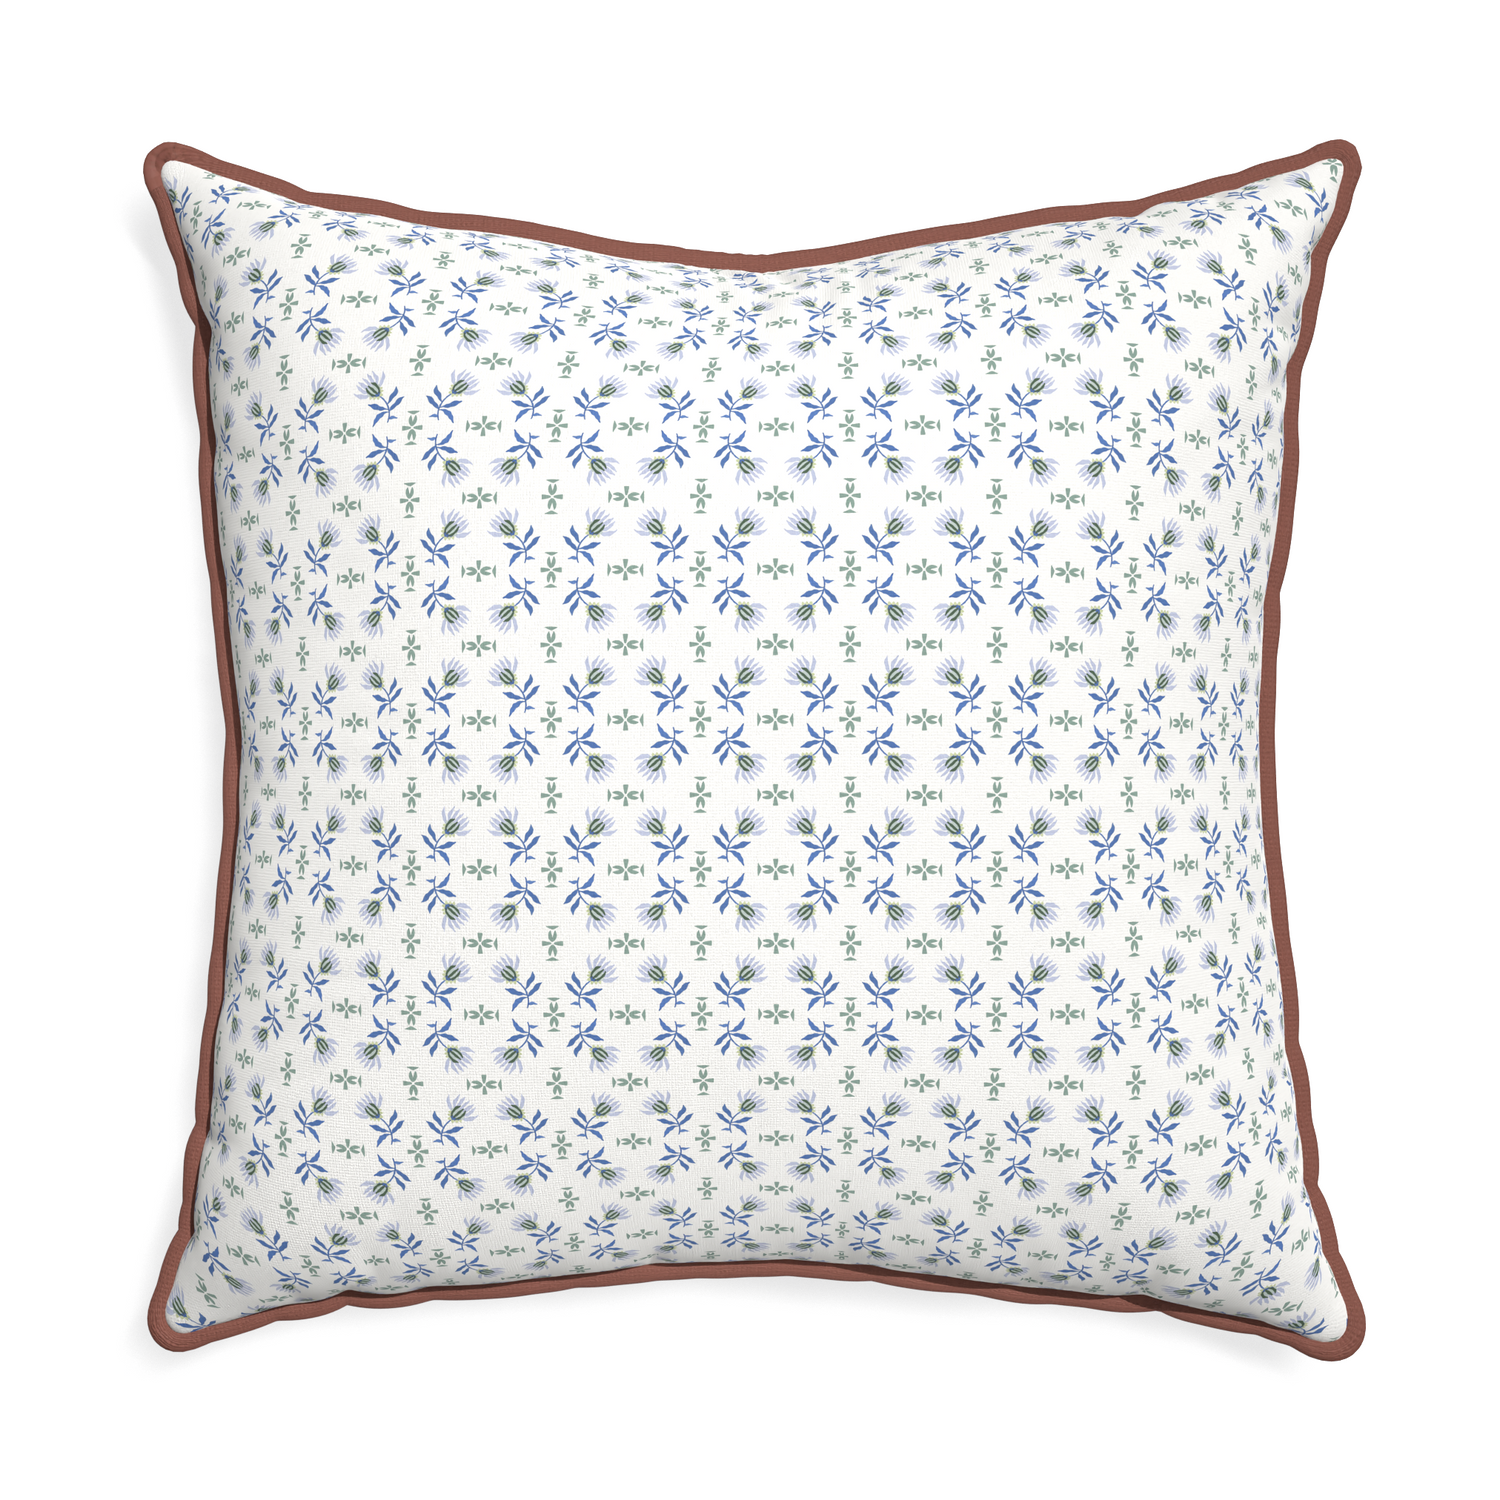 Euro-sham lee custom blue & green floralpillow with w piping on white background